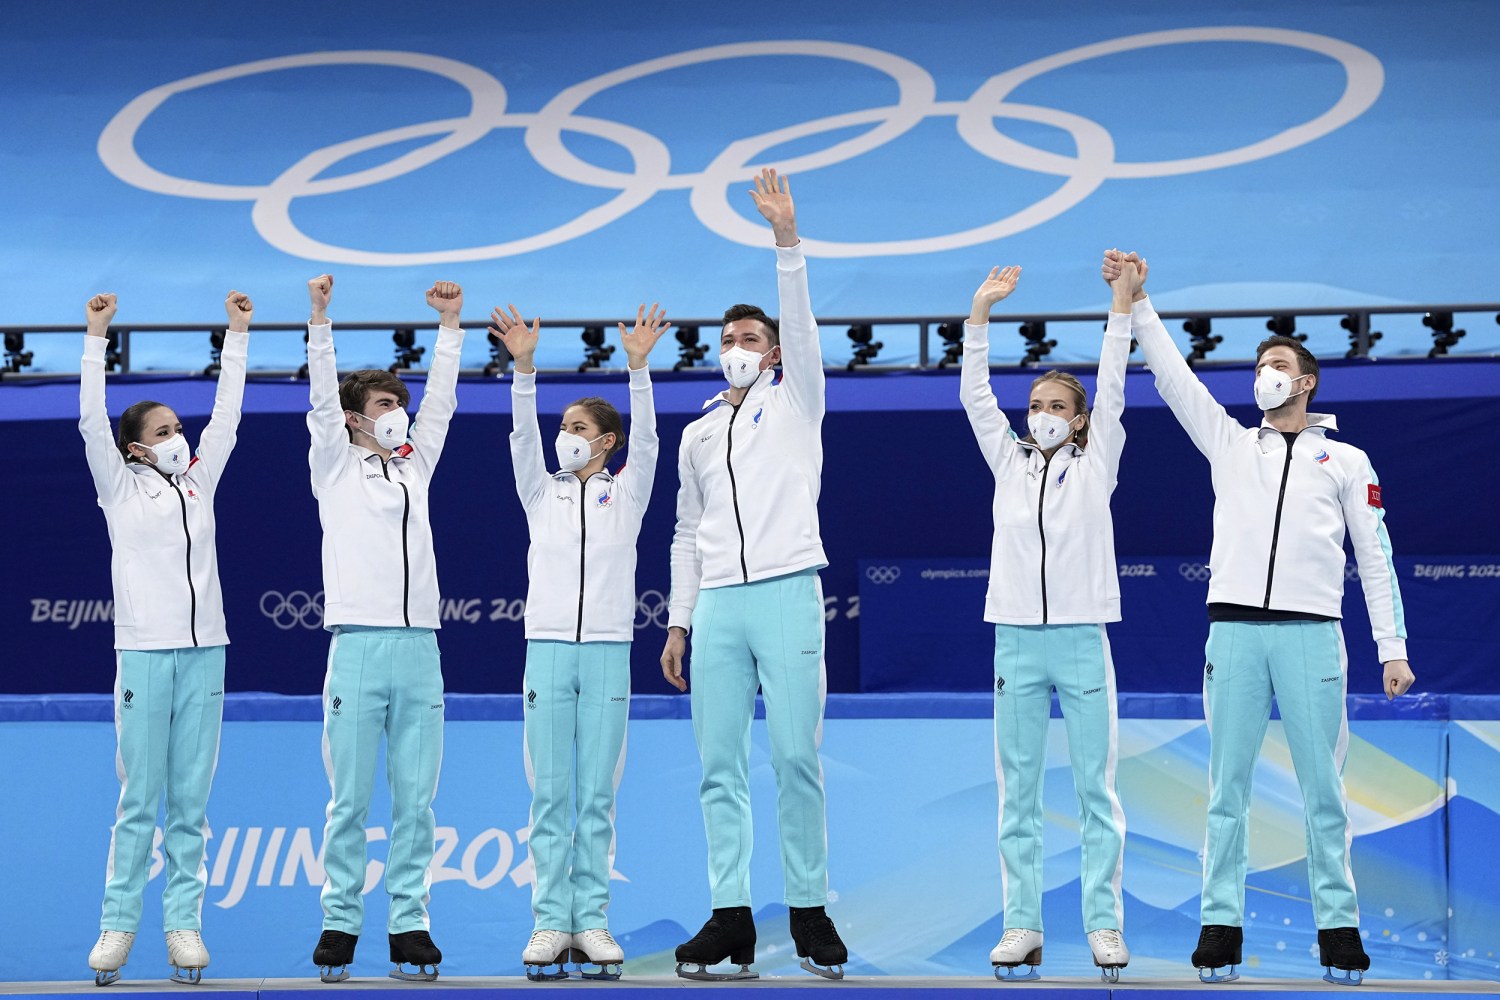 US Curling Team Given Wrong Medals During Winter Olympics Ceremony